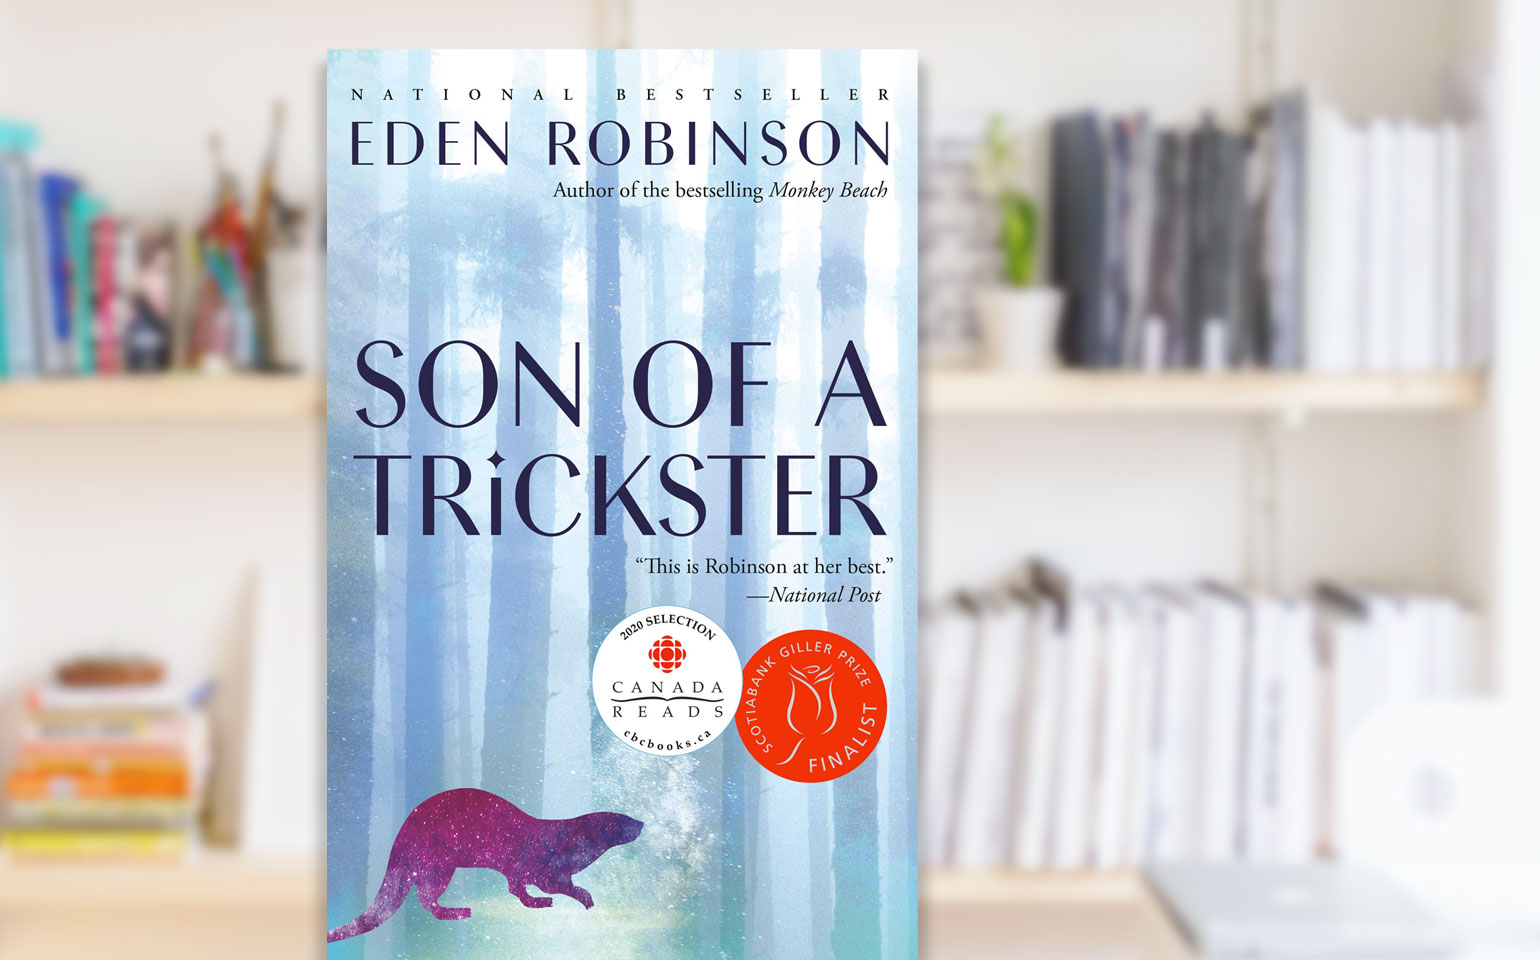 The cover of Eden Robinson's Son of a Trickster is shown, which depicts a river otter.